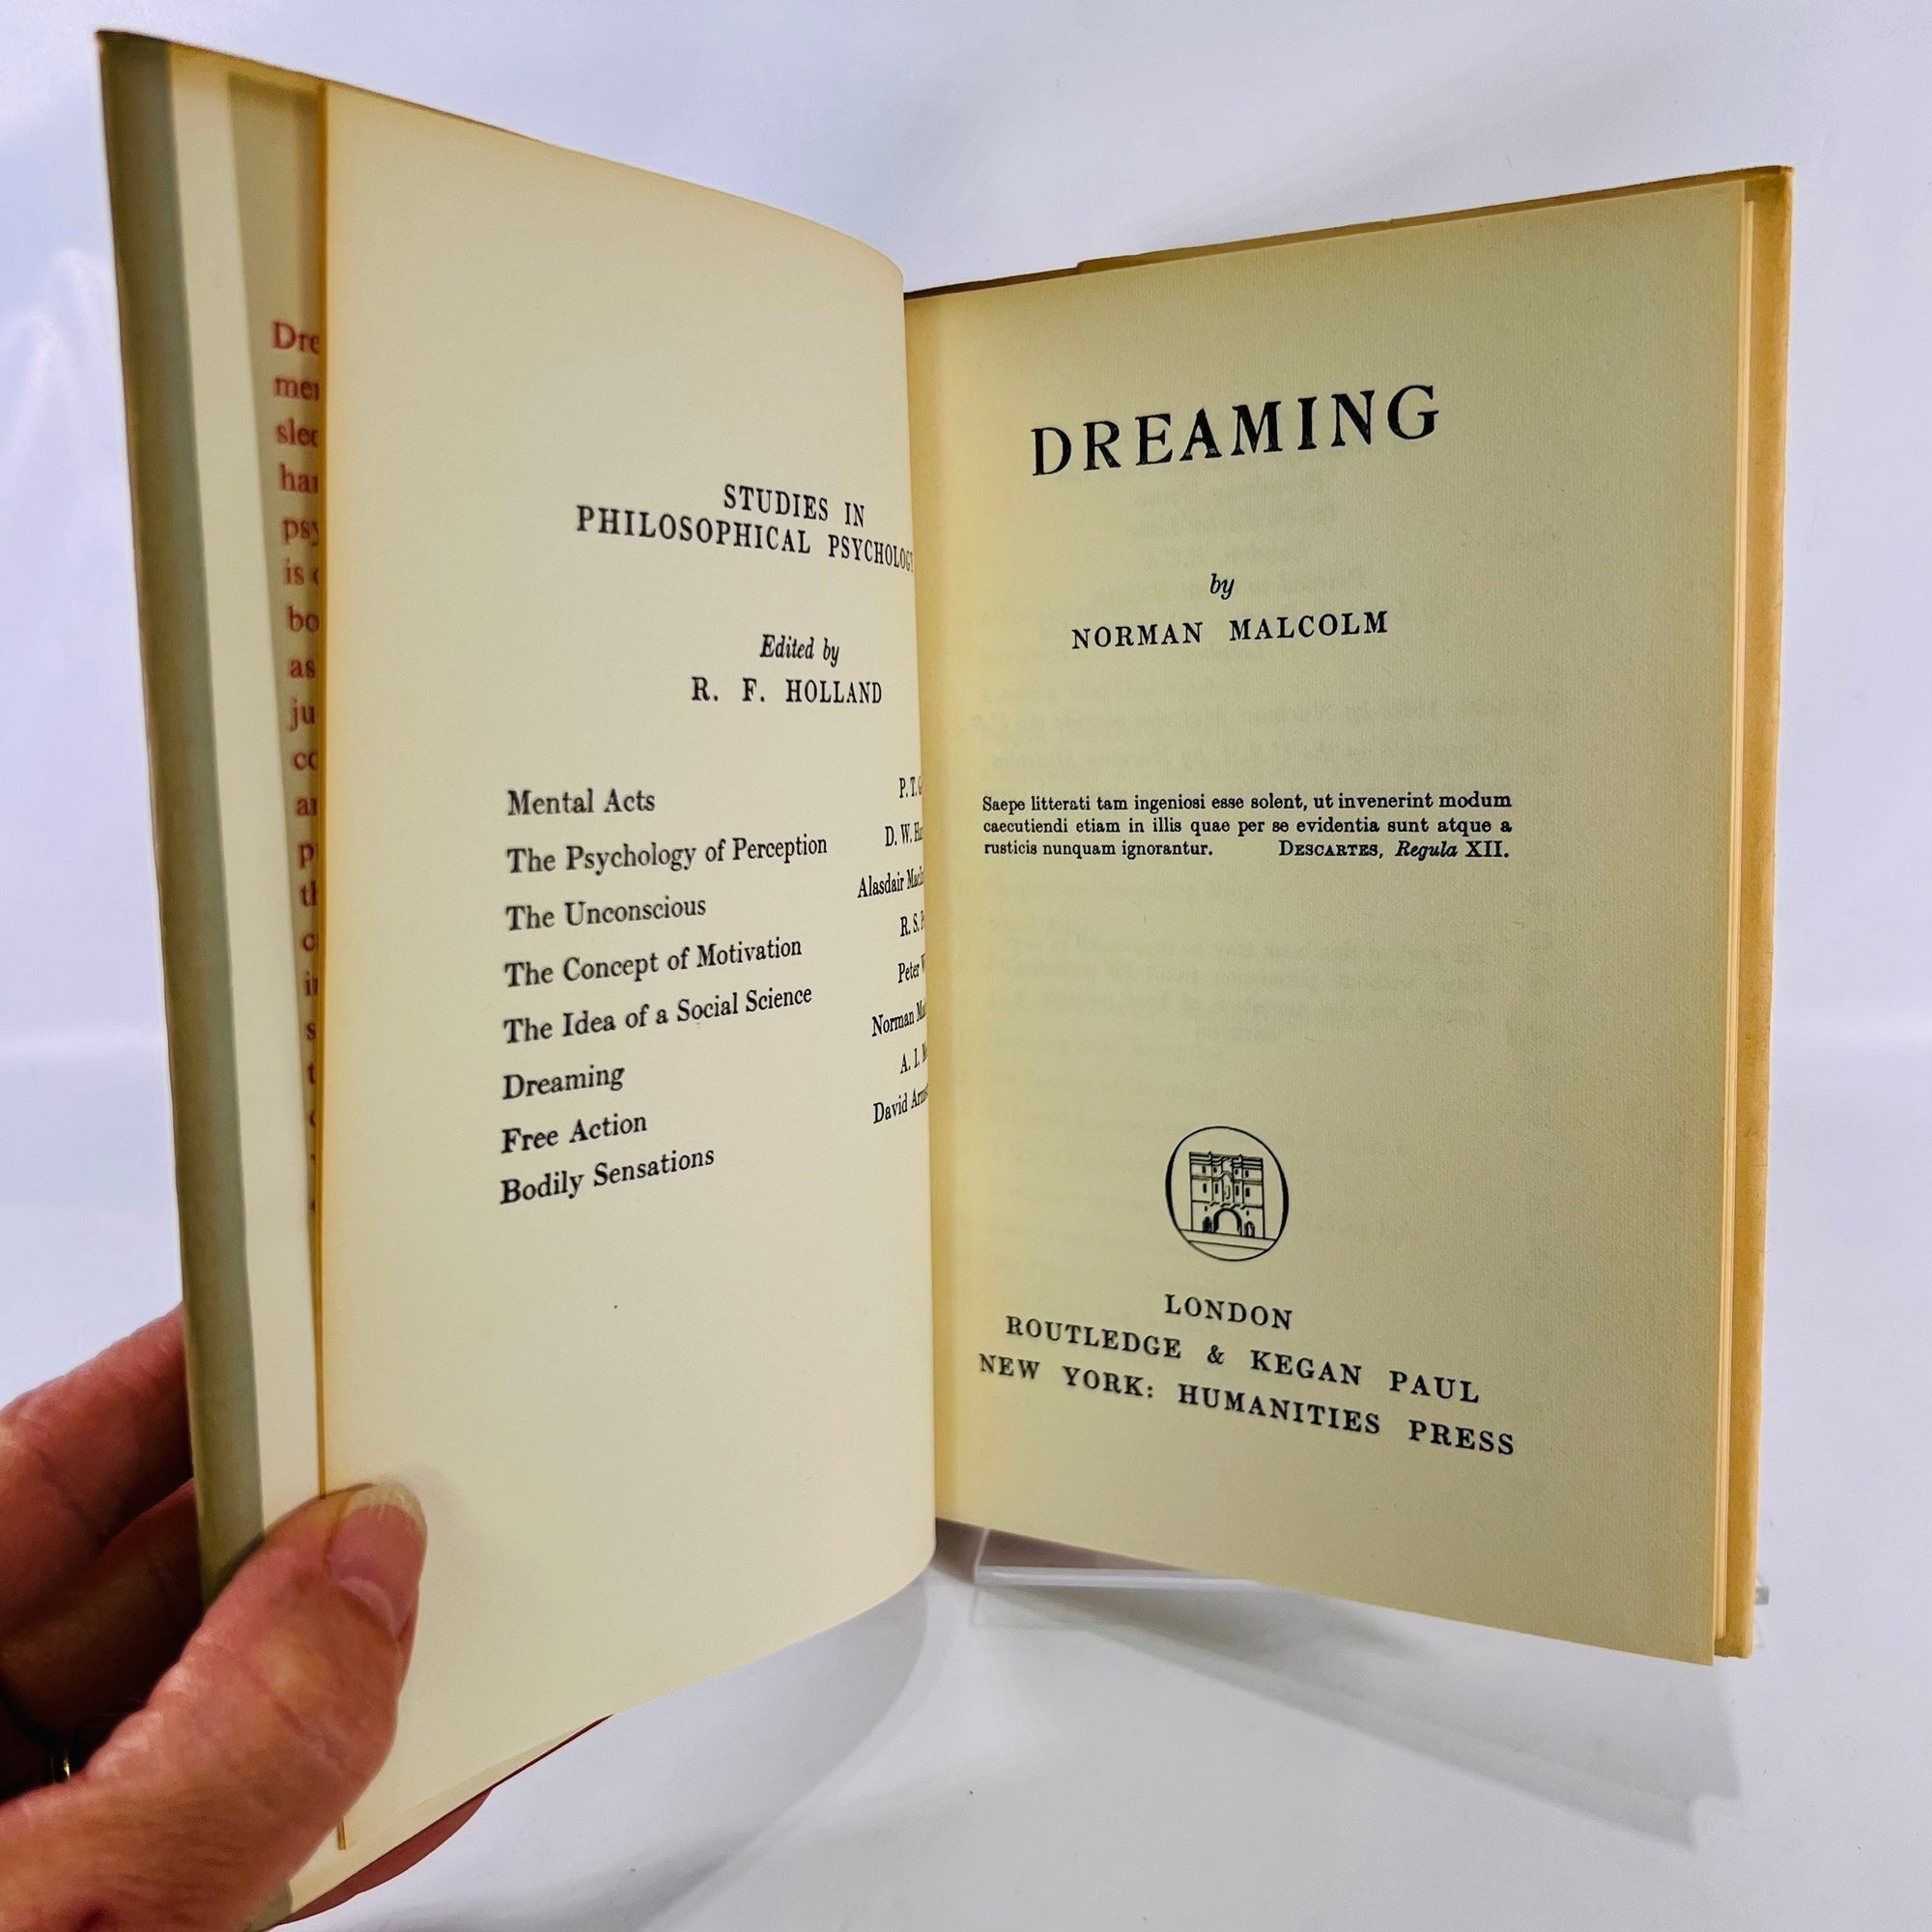 Dreaming Studies in Philosophical Psychology by Norman Malcolm 1962 Humanities Press Vintage Medical Book